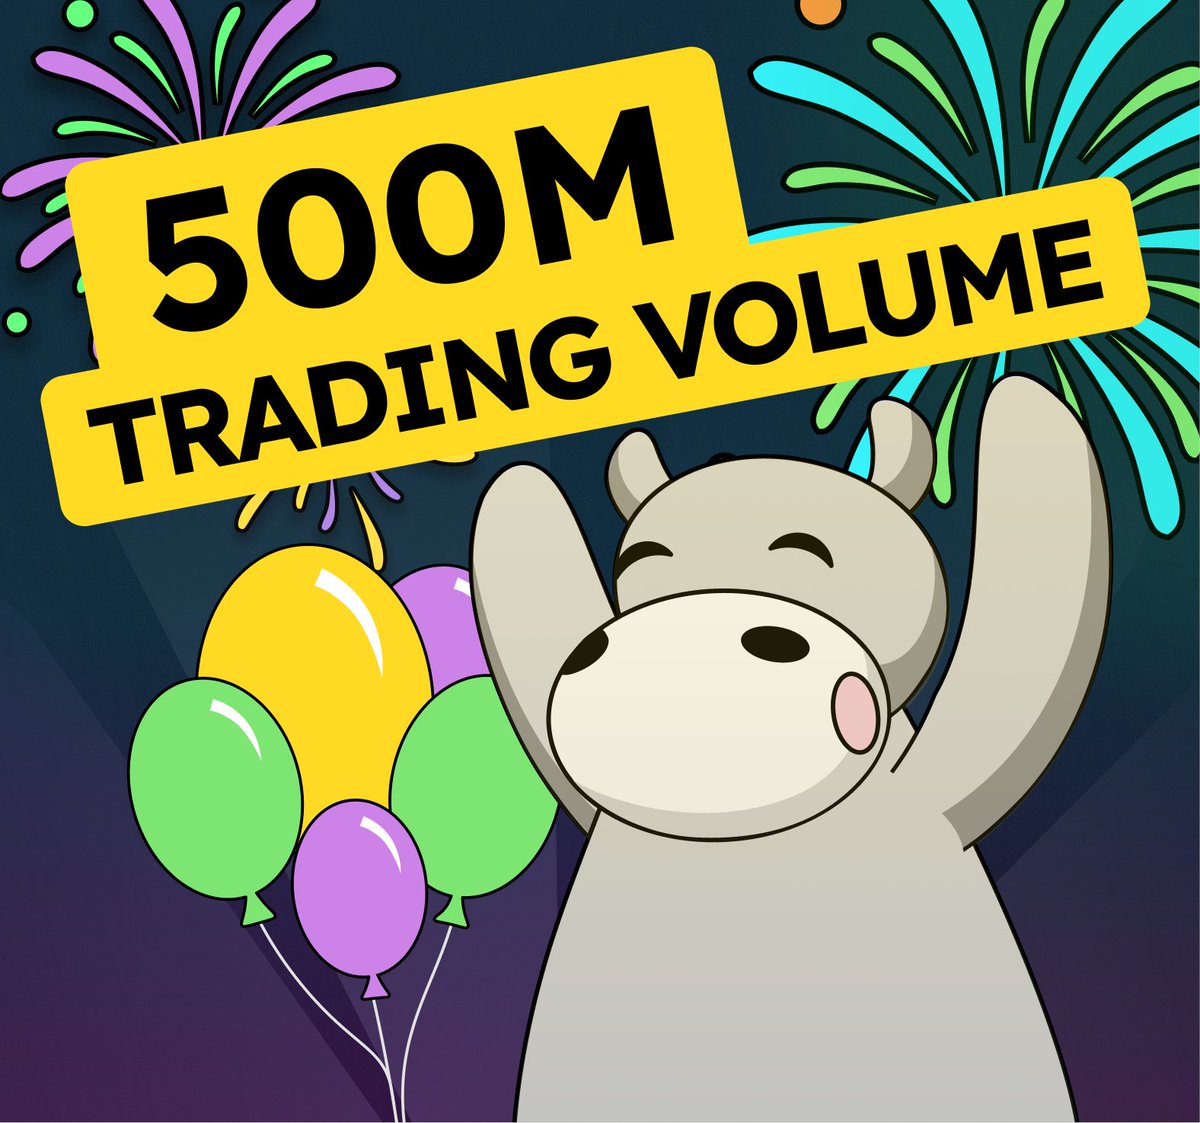 GM everyone! 💛 We have blown past 500M* ADA in trading volume since the launch of our marketplace 💥 We will continue to improve JPG Store to make sure our users always have the best experience for buying, selling & minting Cardano NFTs 🤝